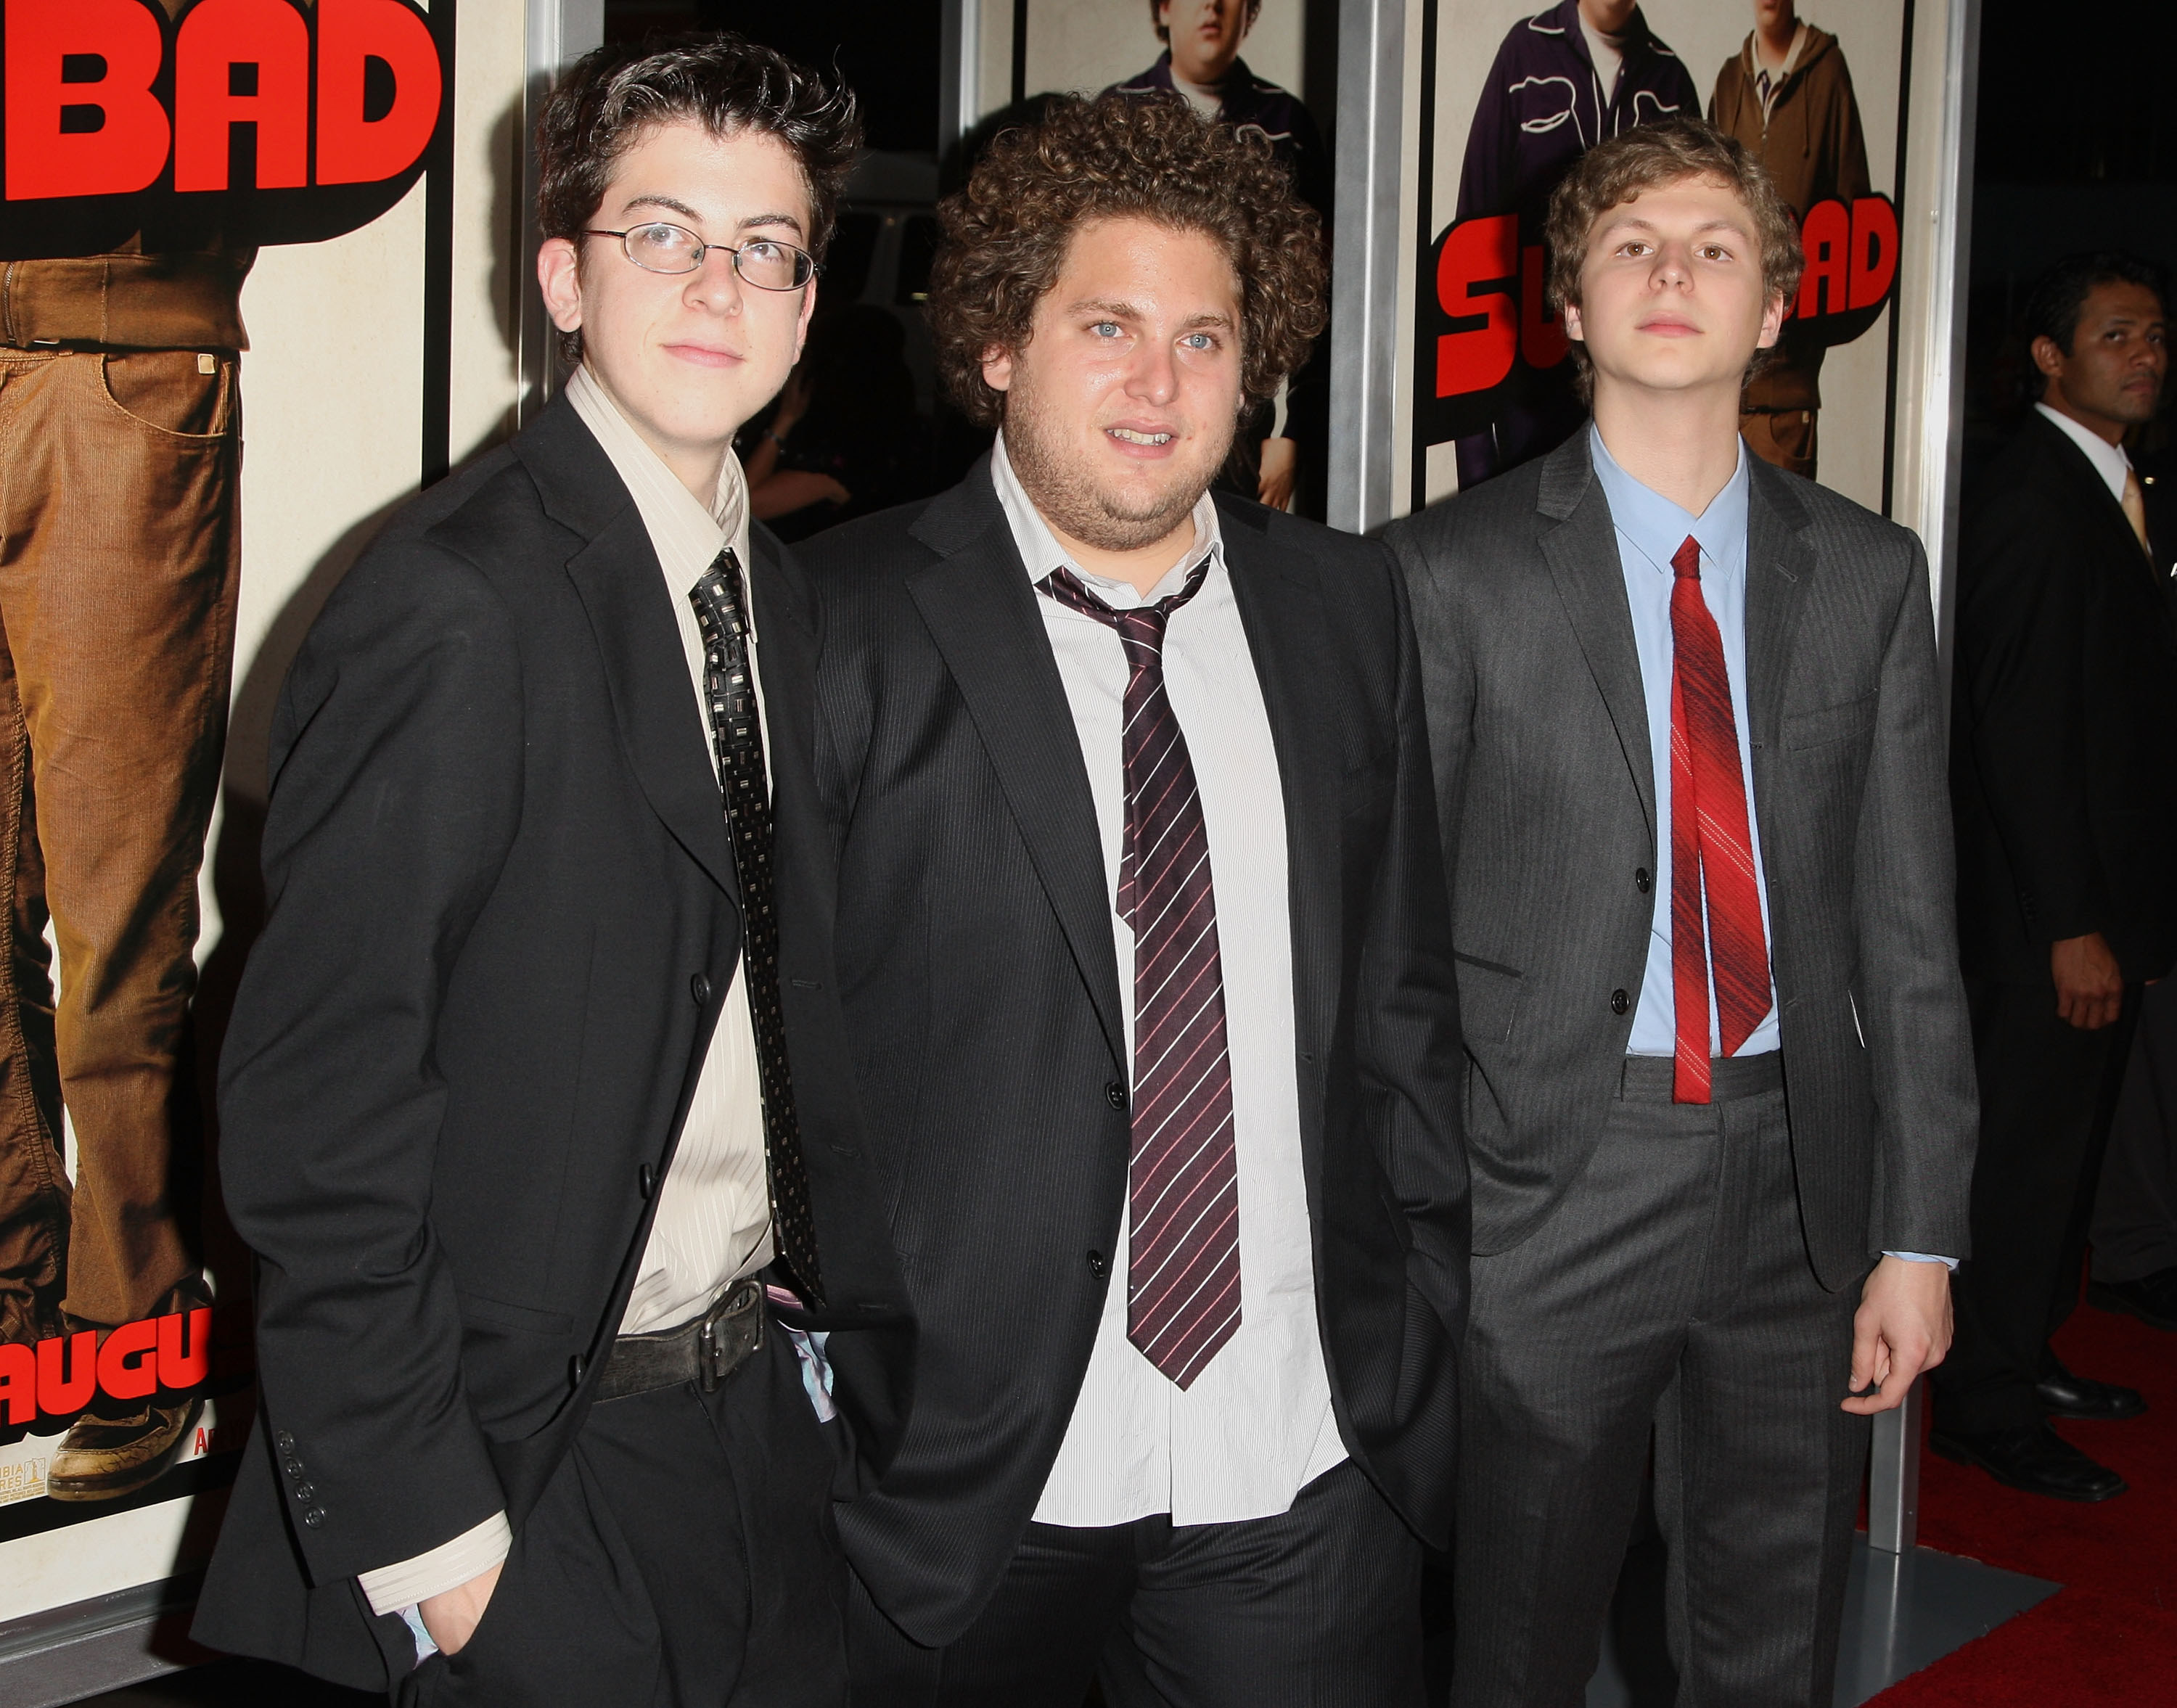 Jonah, Christopher and Michael pose at a premiere